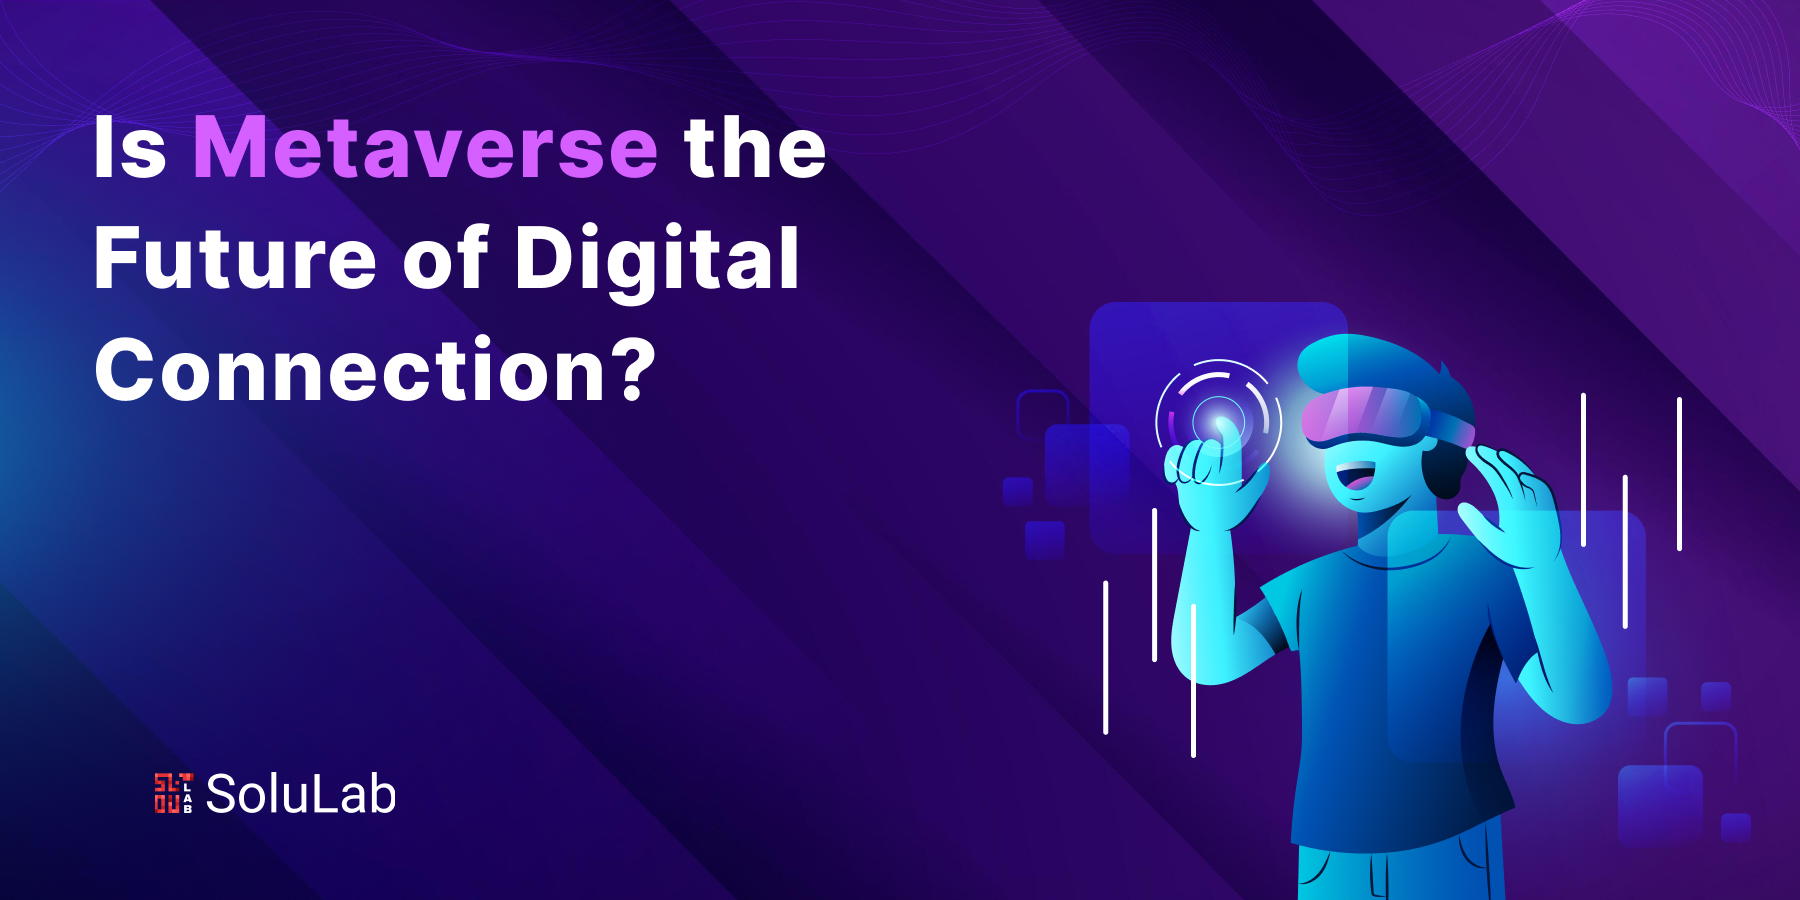 Is Metaverse the Future of Digital Connection?